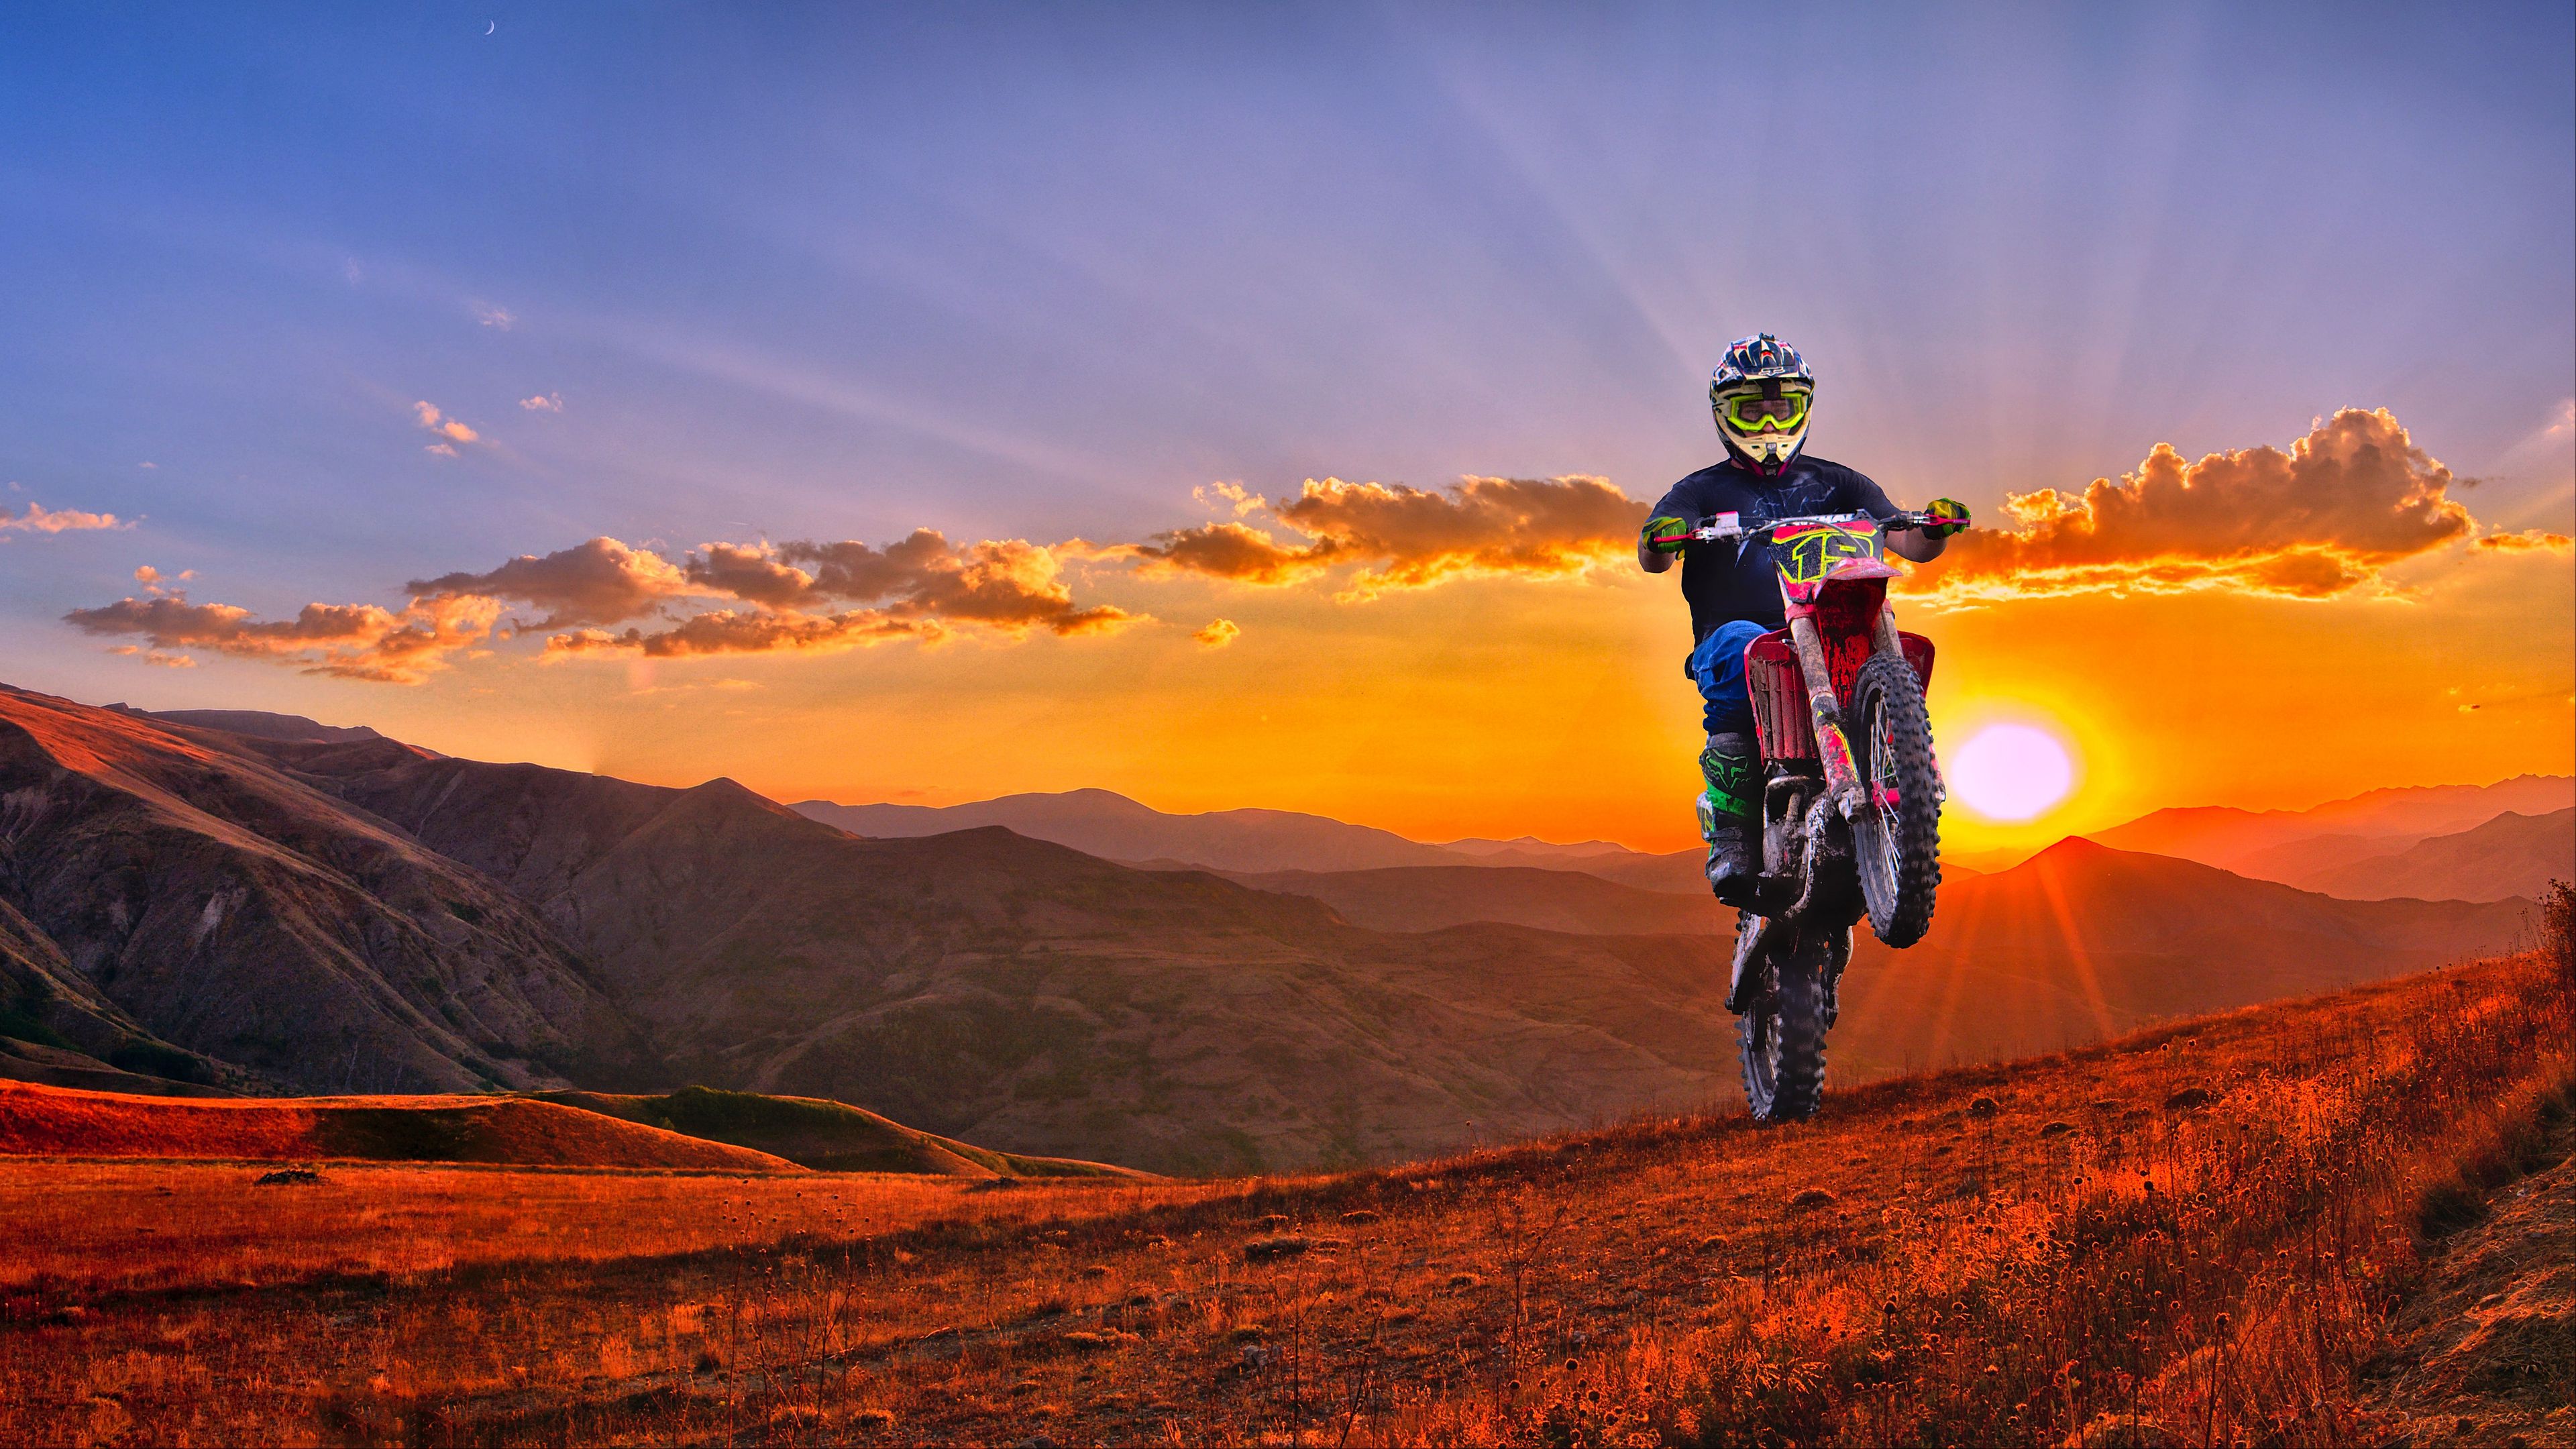 Download Wallpaper 3840x2160 Motorcycle, Motorcyclist, Cross, Mountains, Sunset, Off Road 4k Uhd 16:9 HD Background